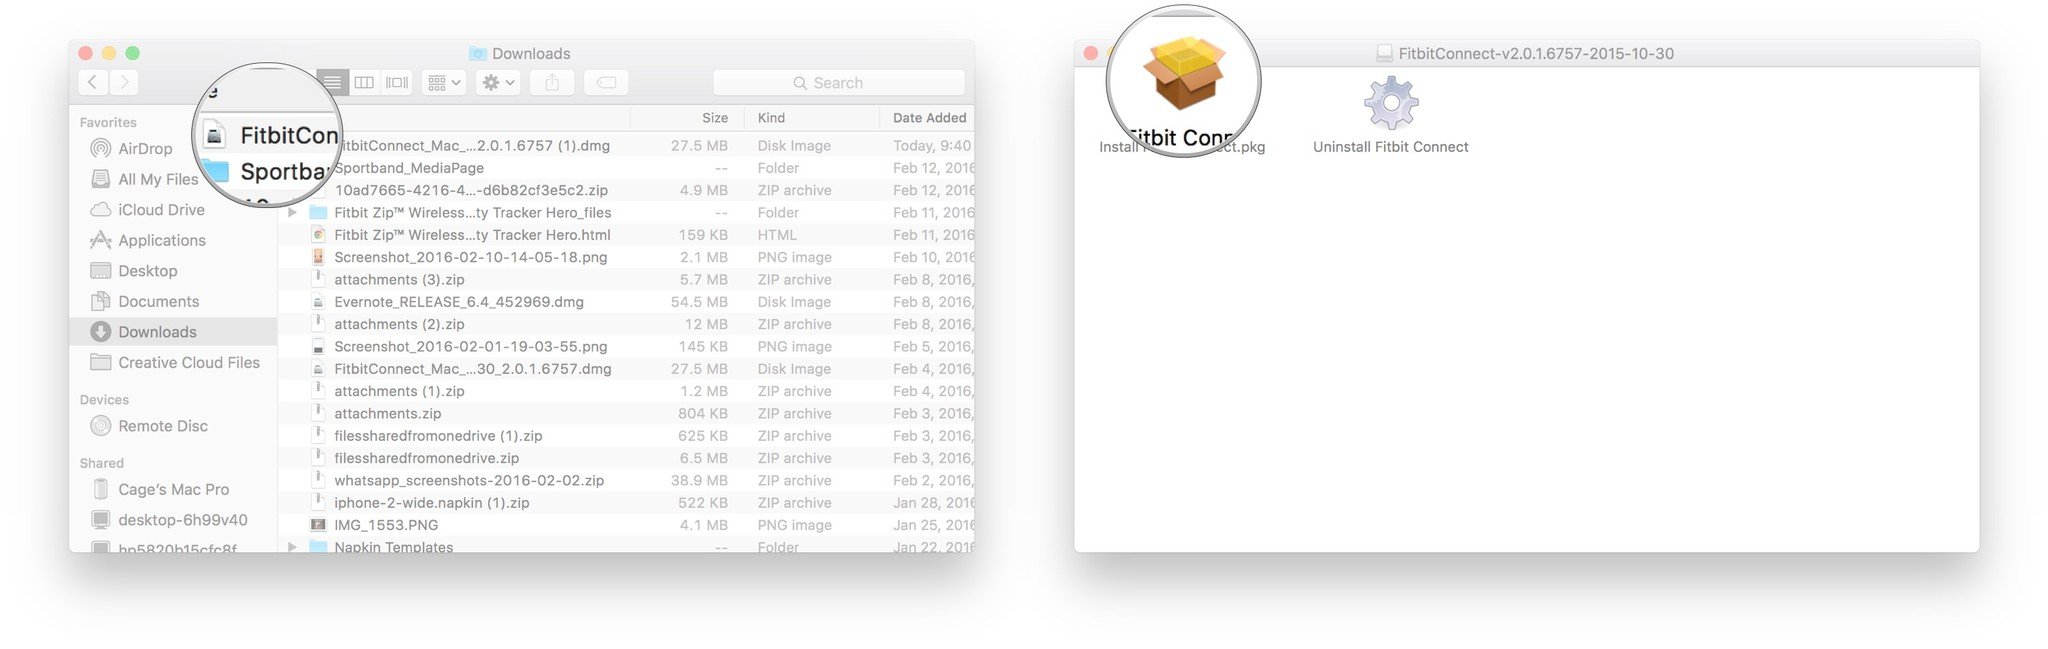 The Fitbit Connect App file in a finder window and The Fitbit Connect App.pkg file in Finder.